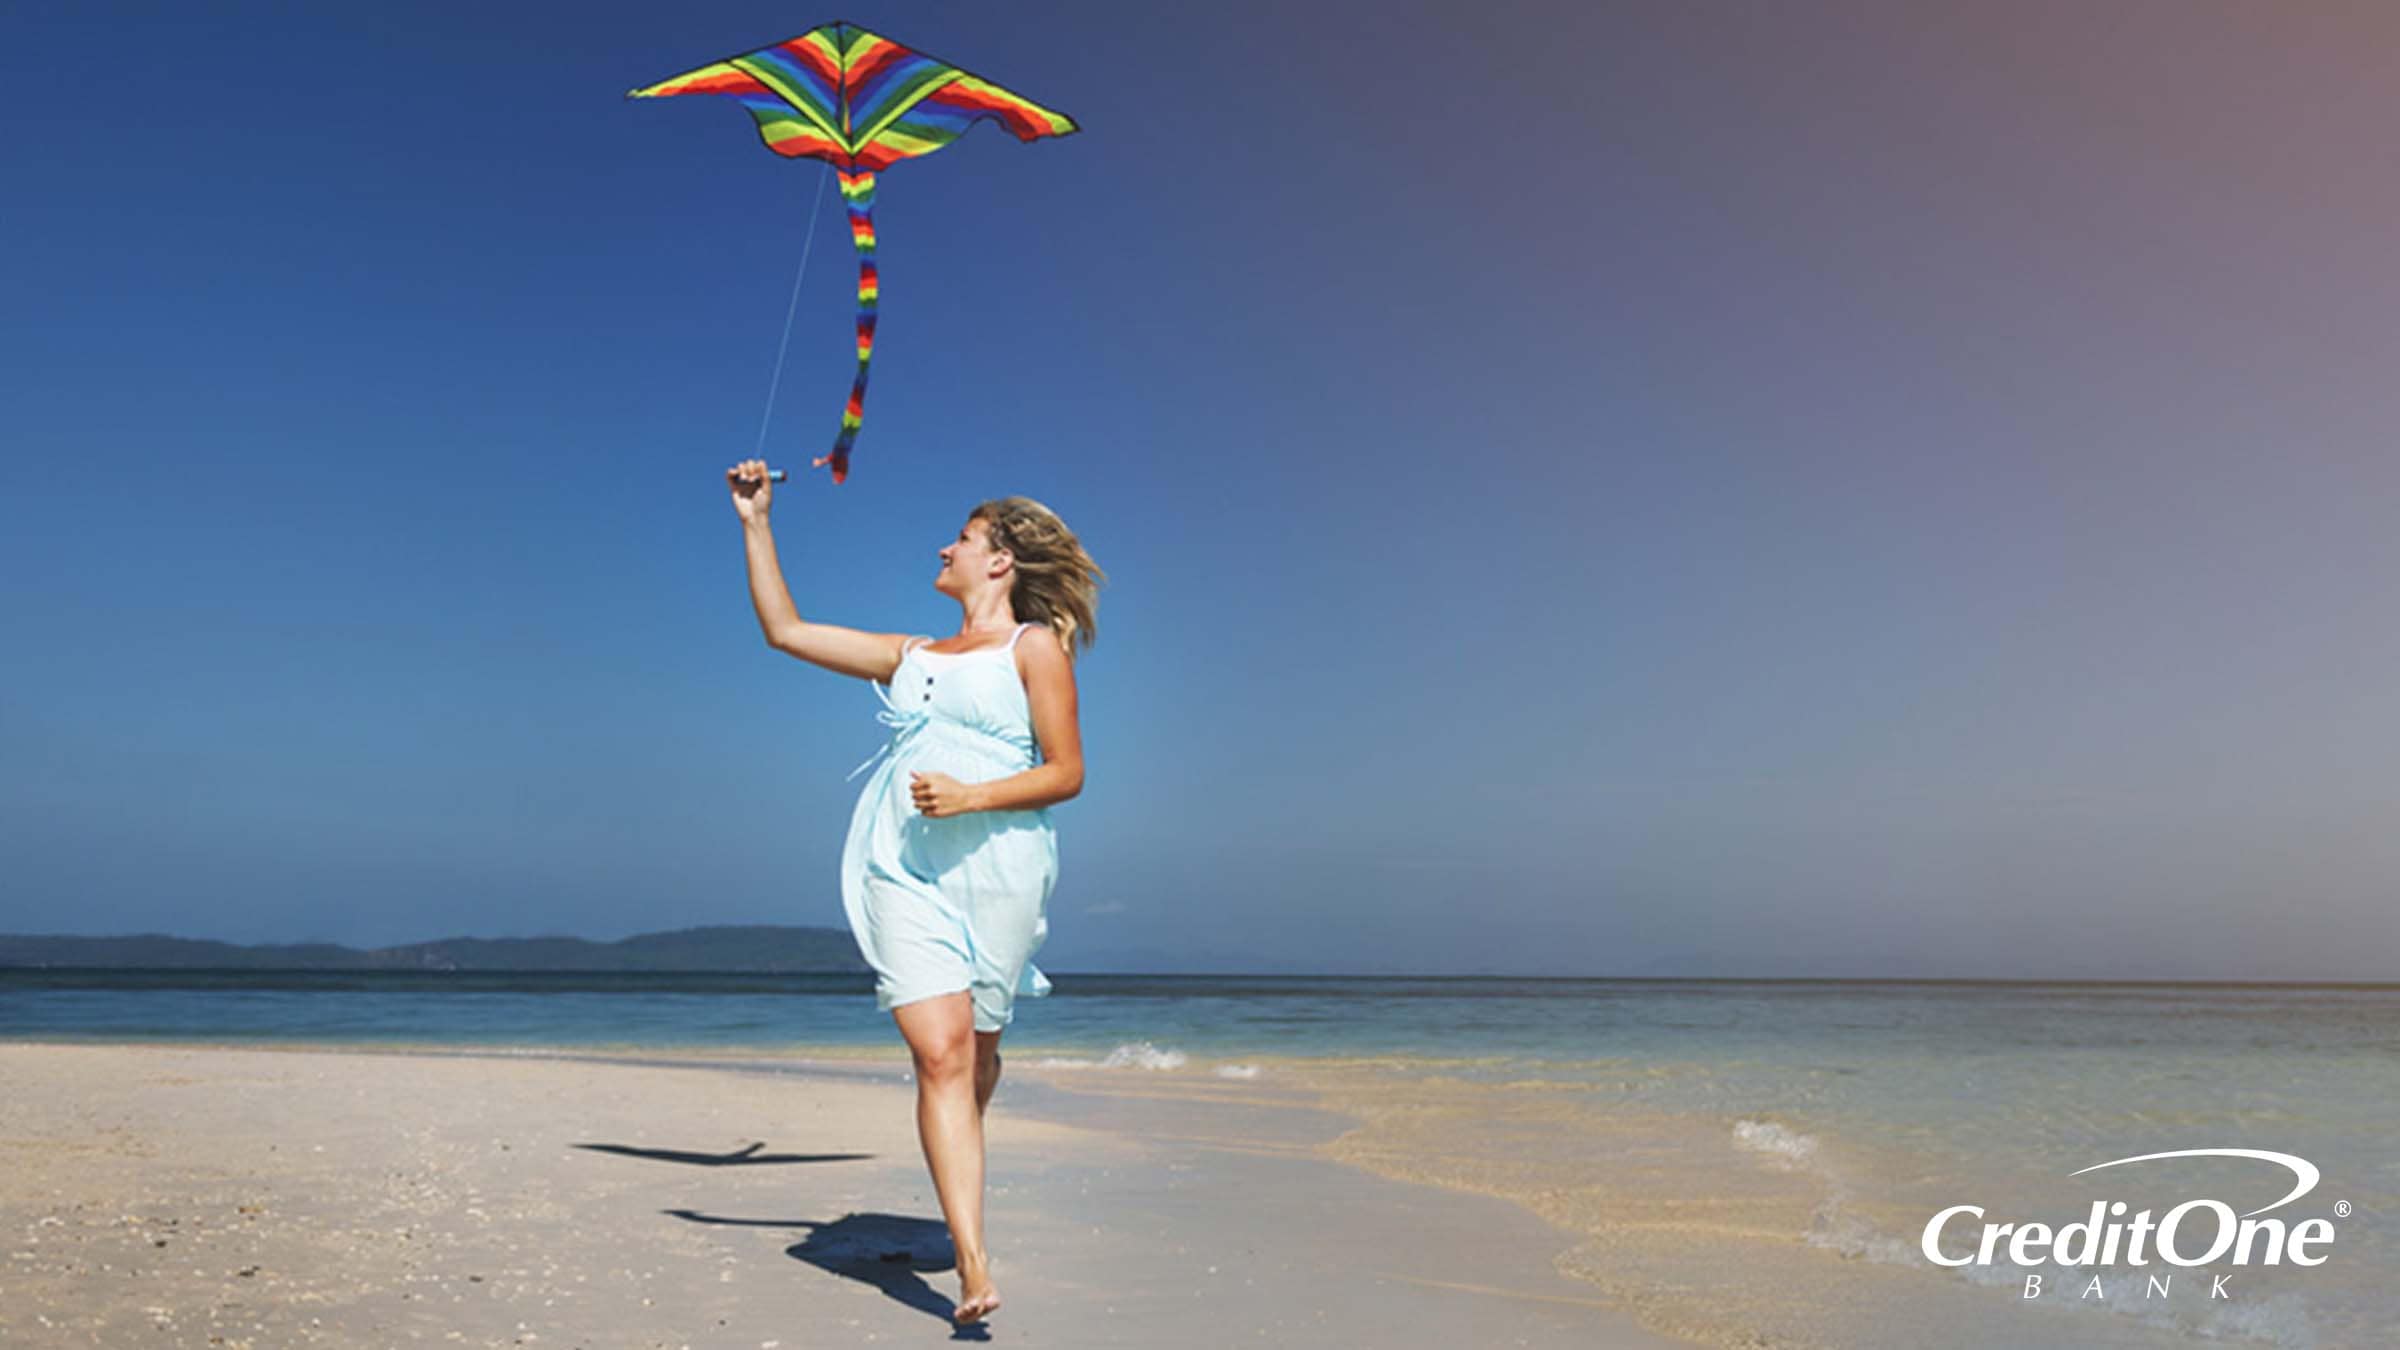 Woman running on a shoreline with a kite flying overhead